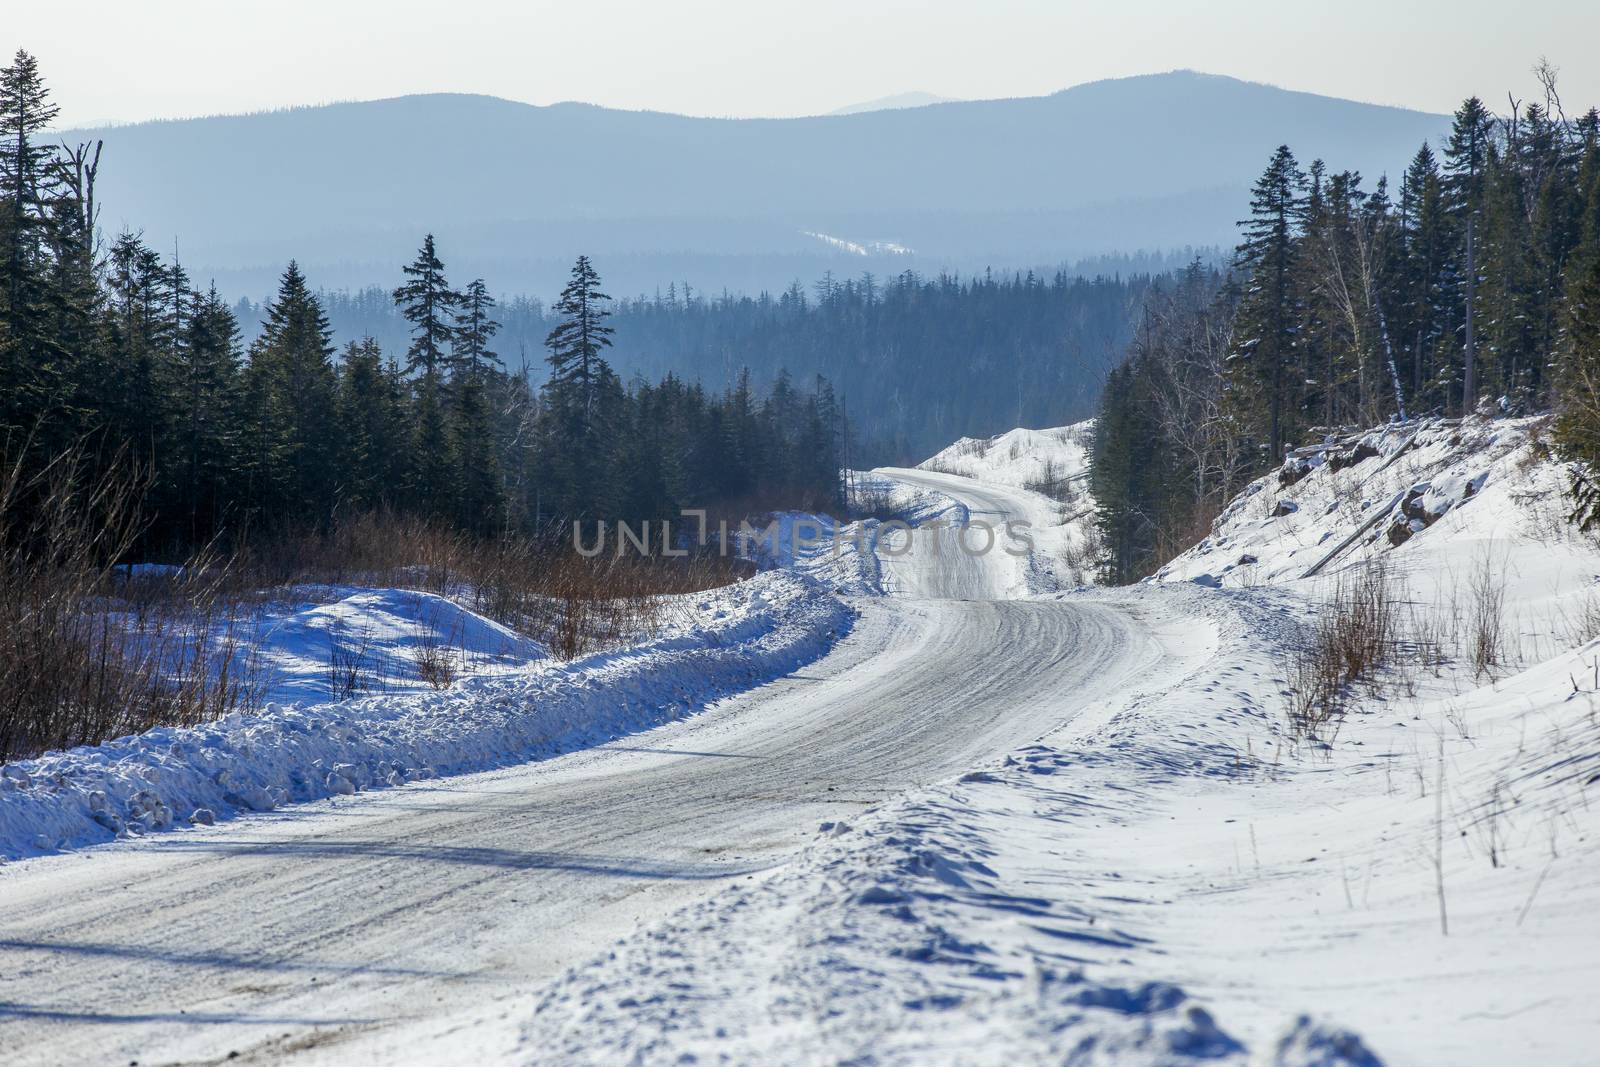 The snow-covered road passes by tall coniferous trees